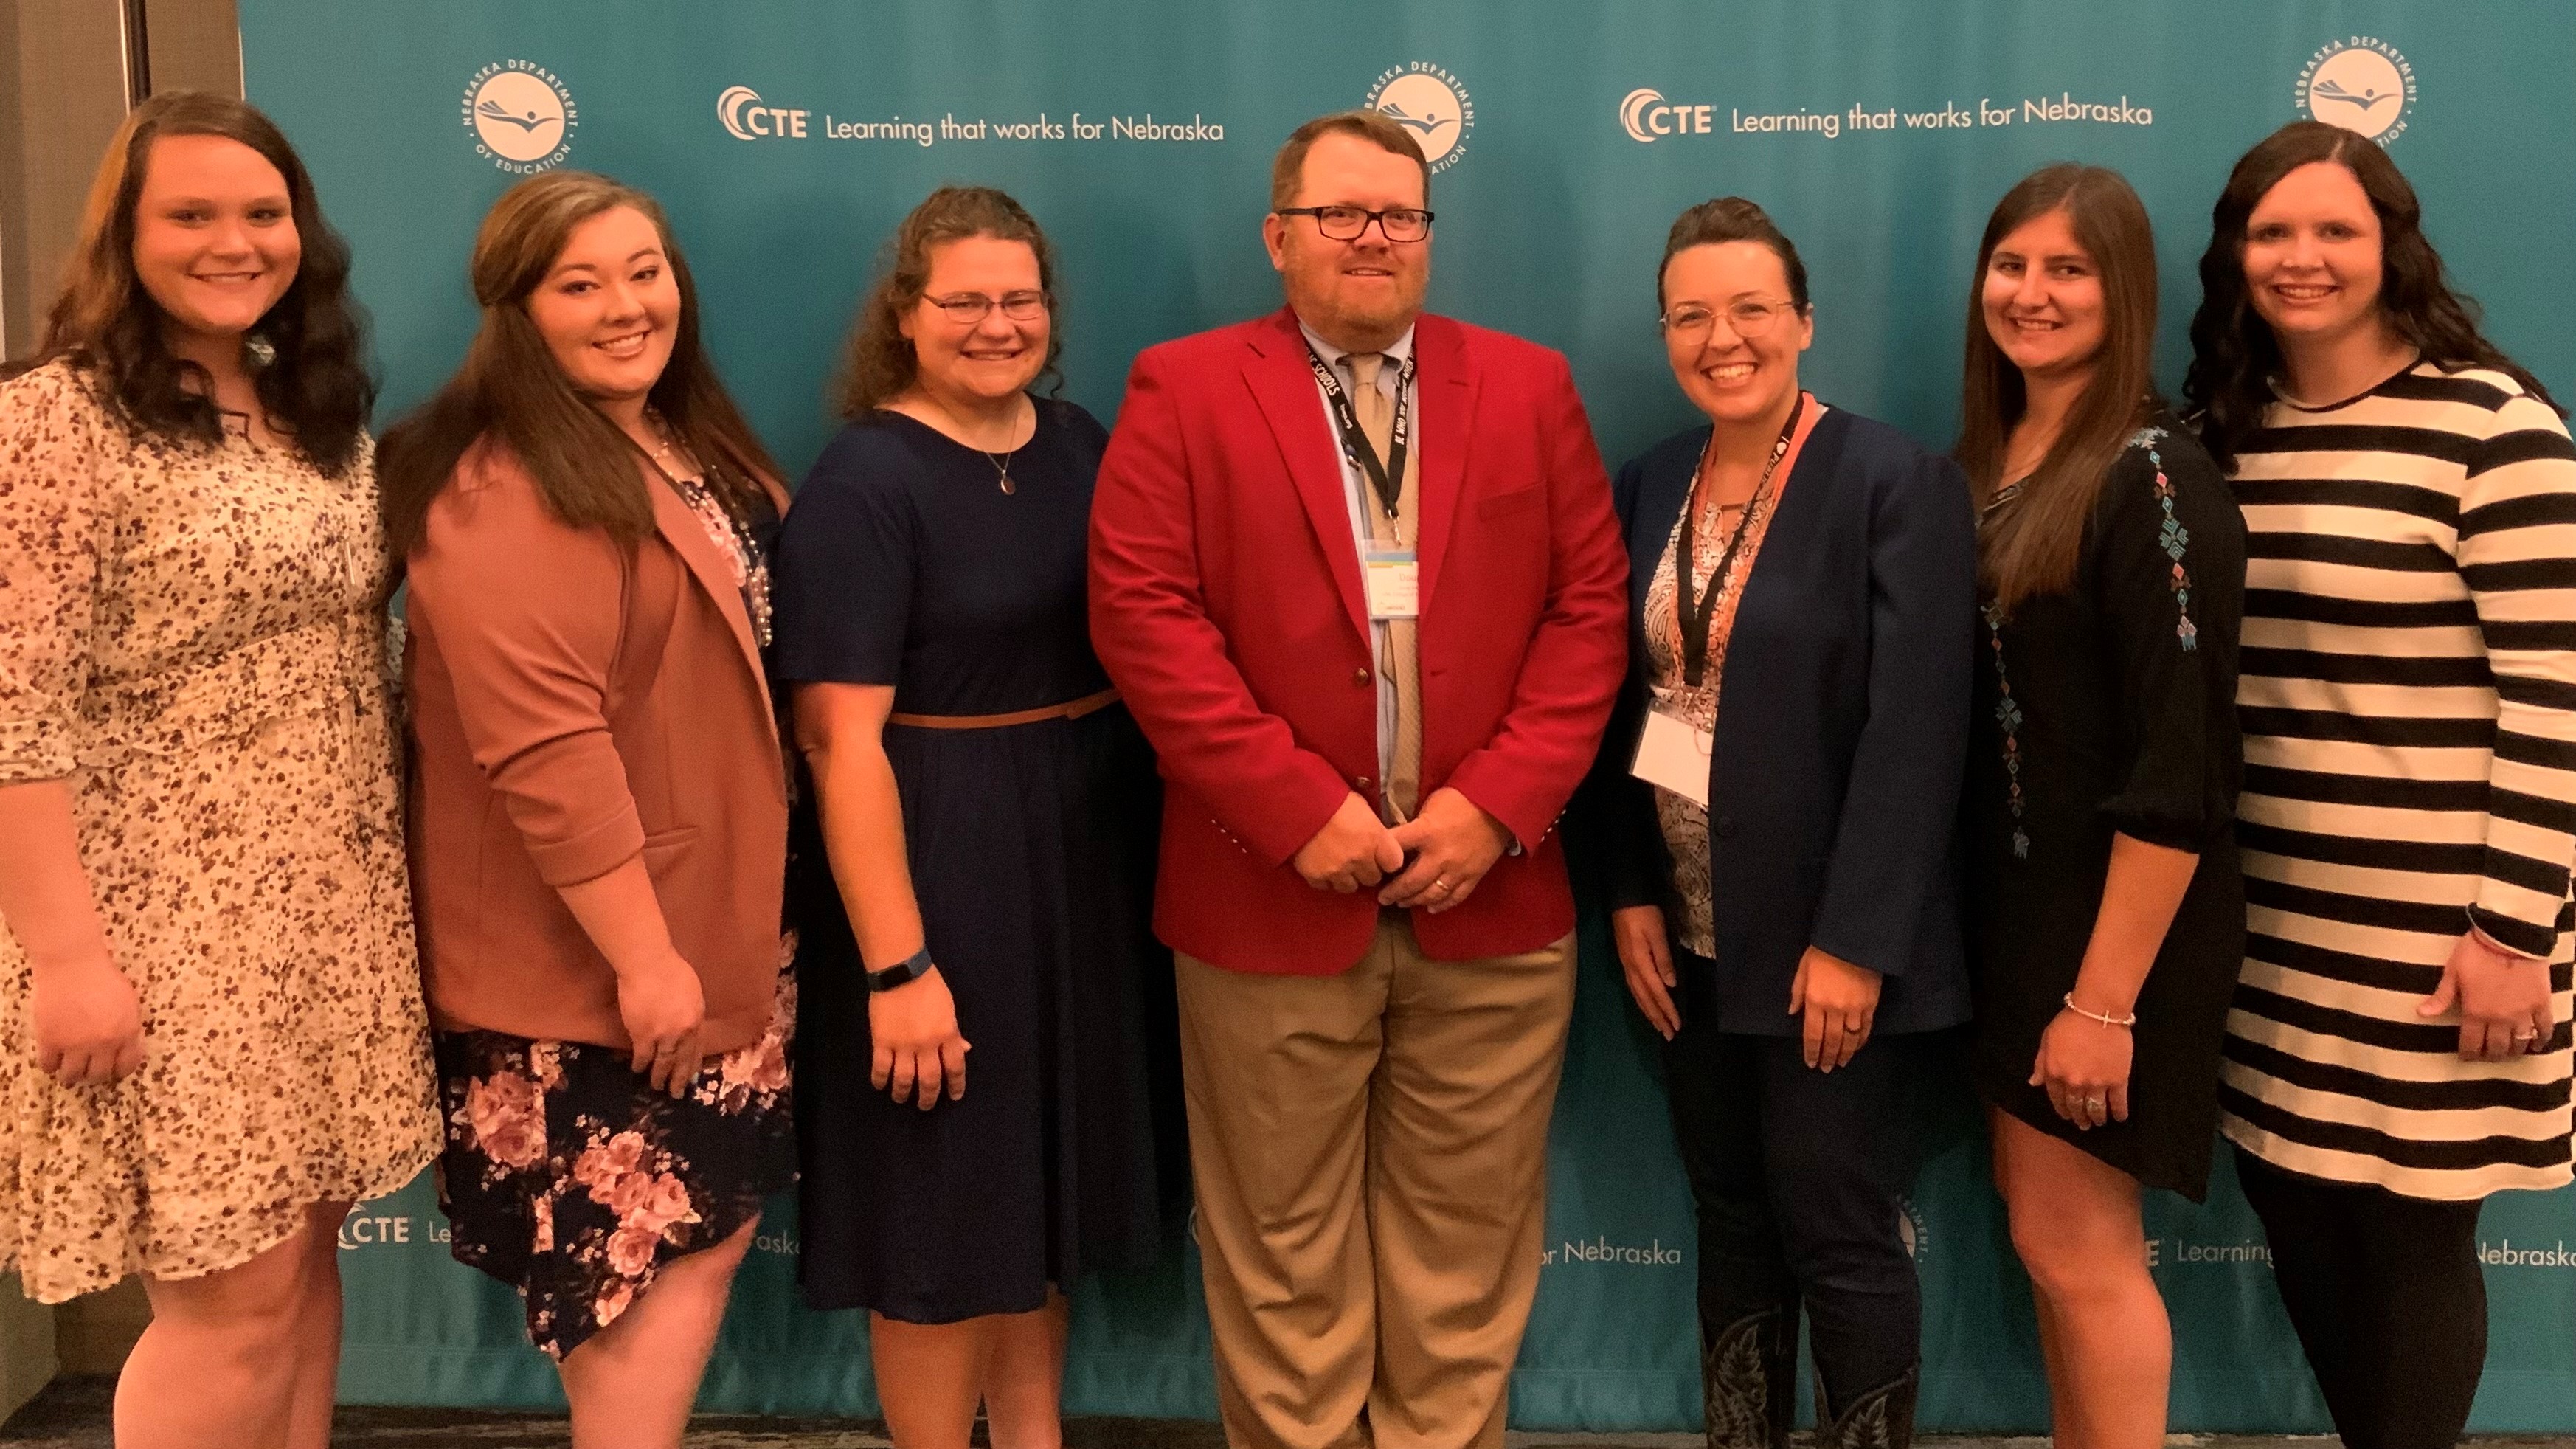 Six graduates of the Nebraska College of Technical Agriculture join Dr. Doug Smith during the Nebraska Agricultural Educators Association conference. Smith was honored for 10 years of teaching. From left, Amanda Schmidt, Kayla Mues, Kara Reimers, Smith, Katelyn Day, Evey Choat and Morgan Segner. The alumni are among 24 NCTA graduates currently teaching agriculture education. (Andela Taylor / NCTA)